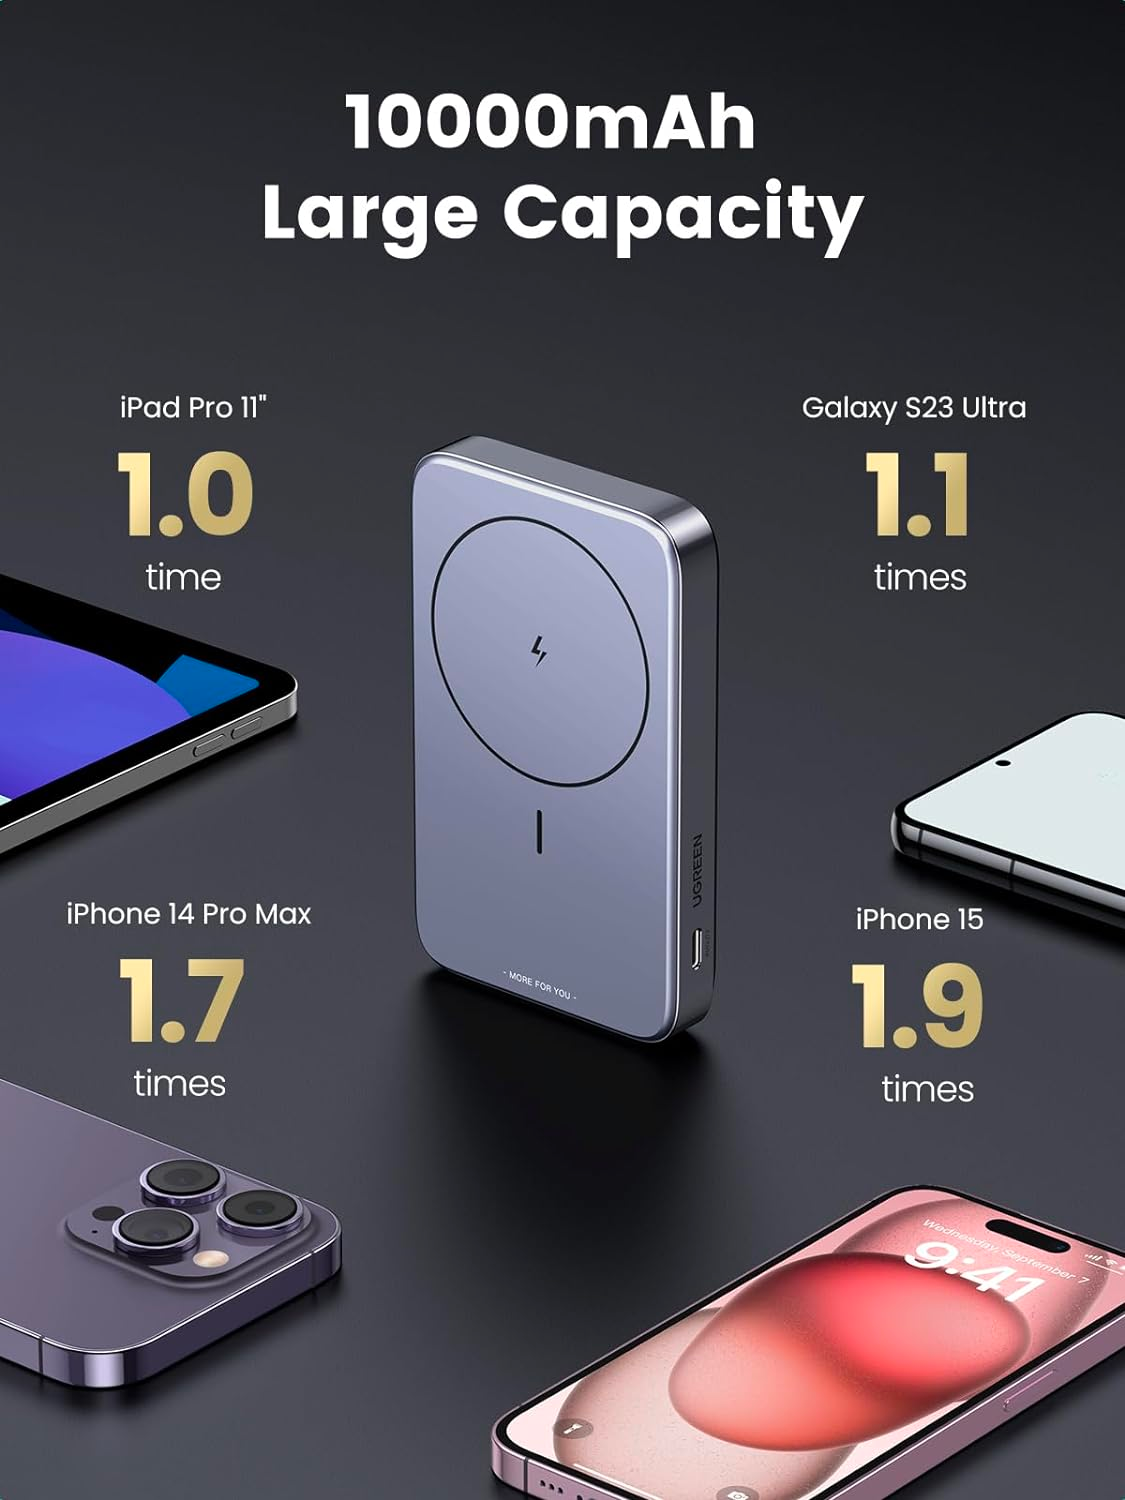 The UGREEN Magnetic Battery 10,000mAh Battery Pack, which is Amazon's newest product, is making waves in the world of portable power items. This power bank stands out because it is versatile and easy to use